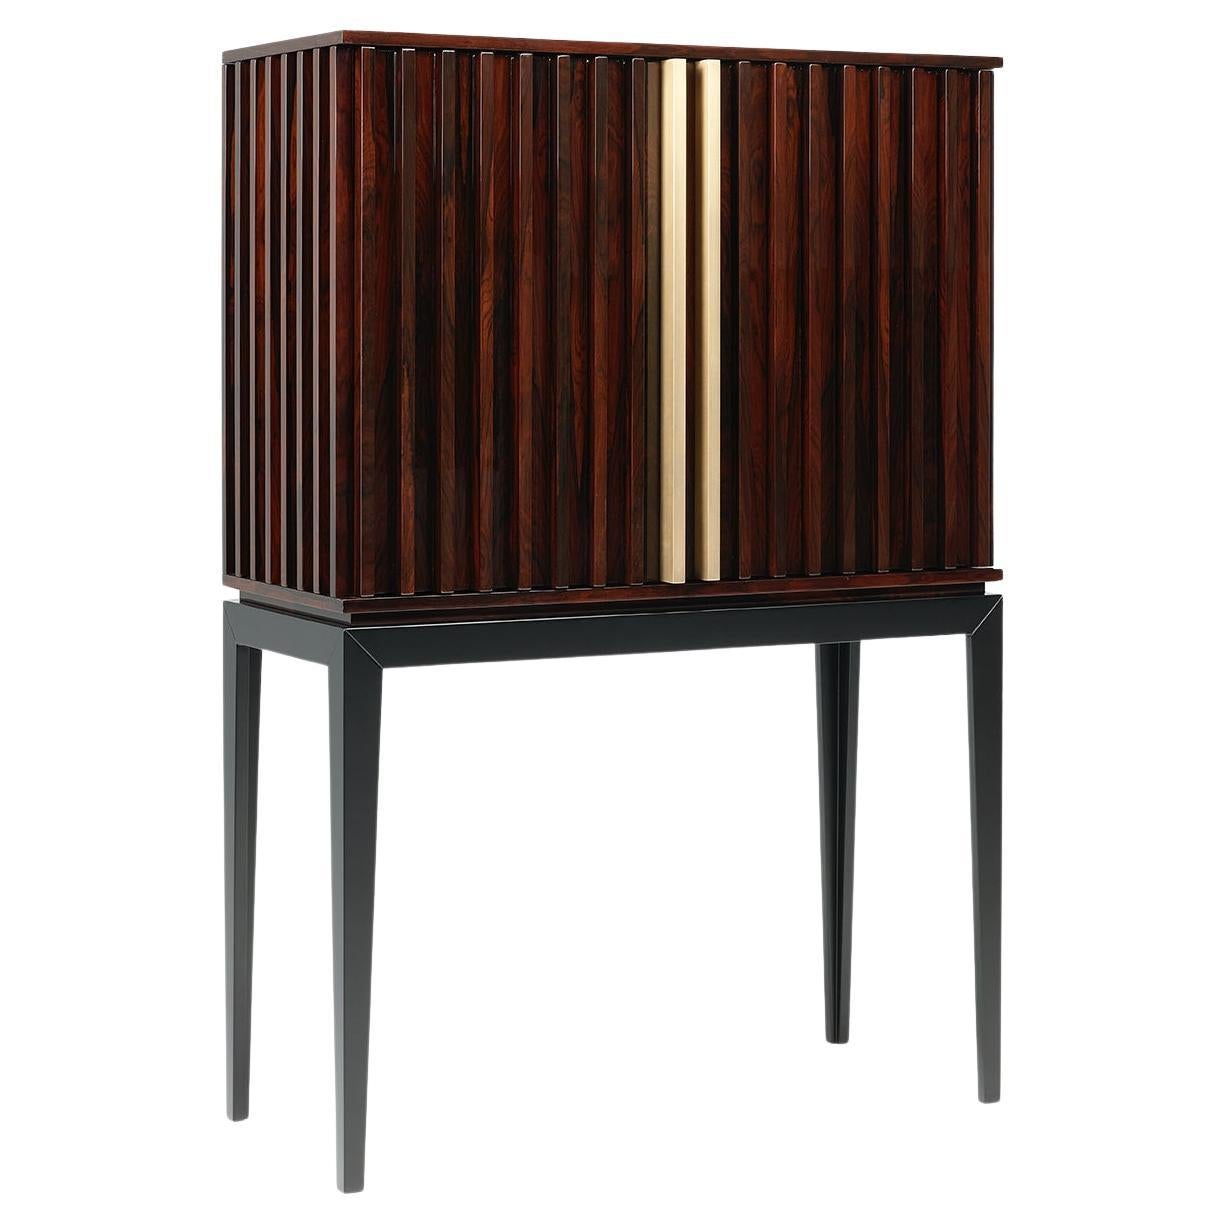 RELEVO Bar Cabinet in Ziricote and Antique Brass For Sale